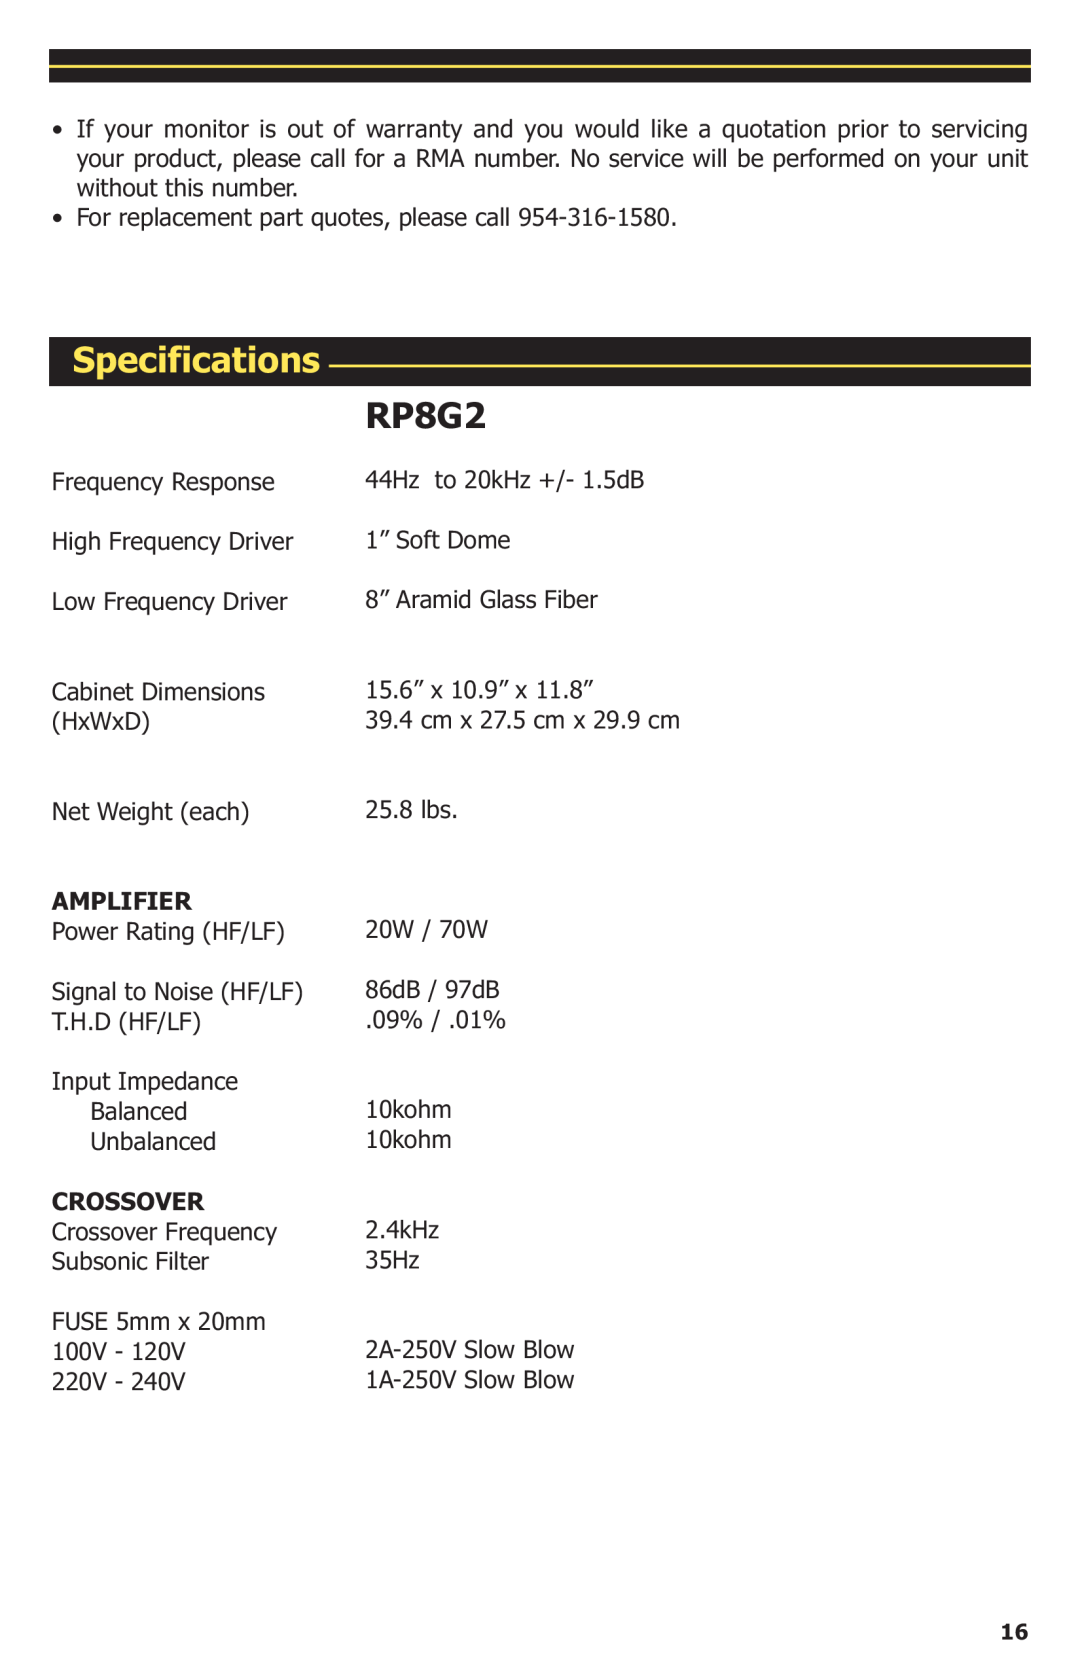 KRK manual RP8G2, Specifications, Amplifier, CROSSOVER Crossover Frequency Subsonic Filter FUSE 5mm x 20mm 